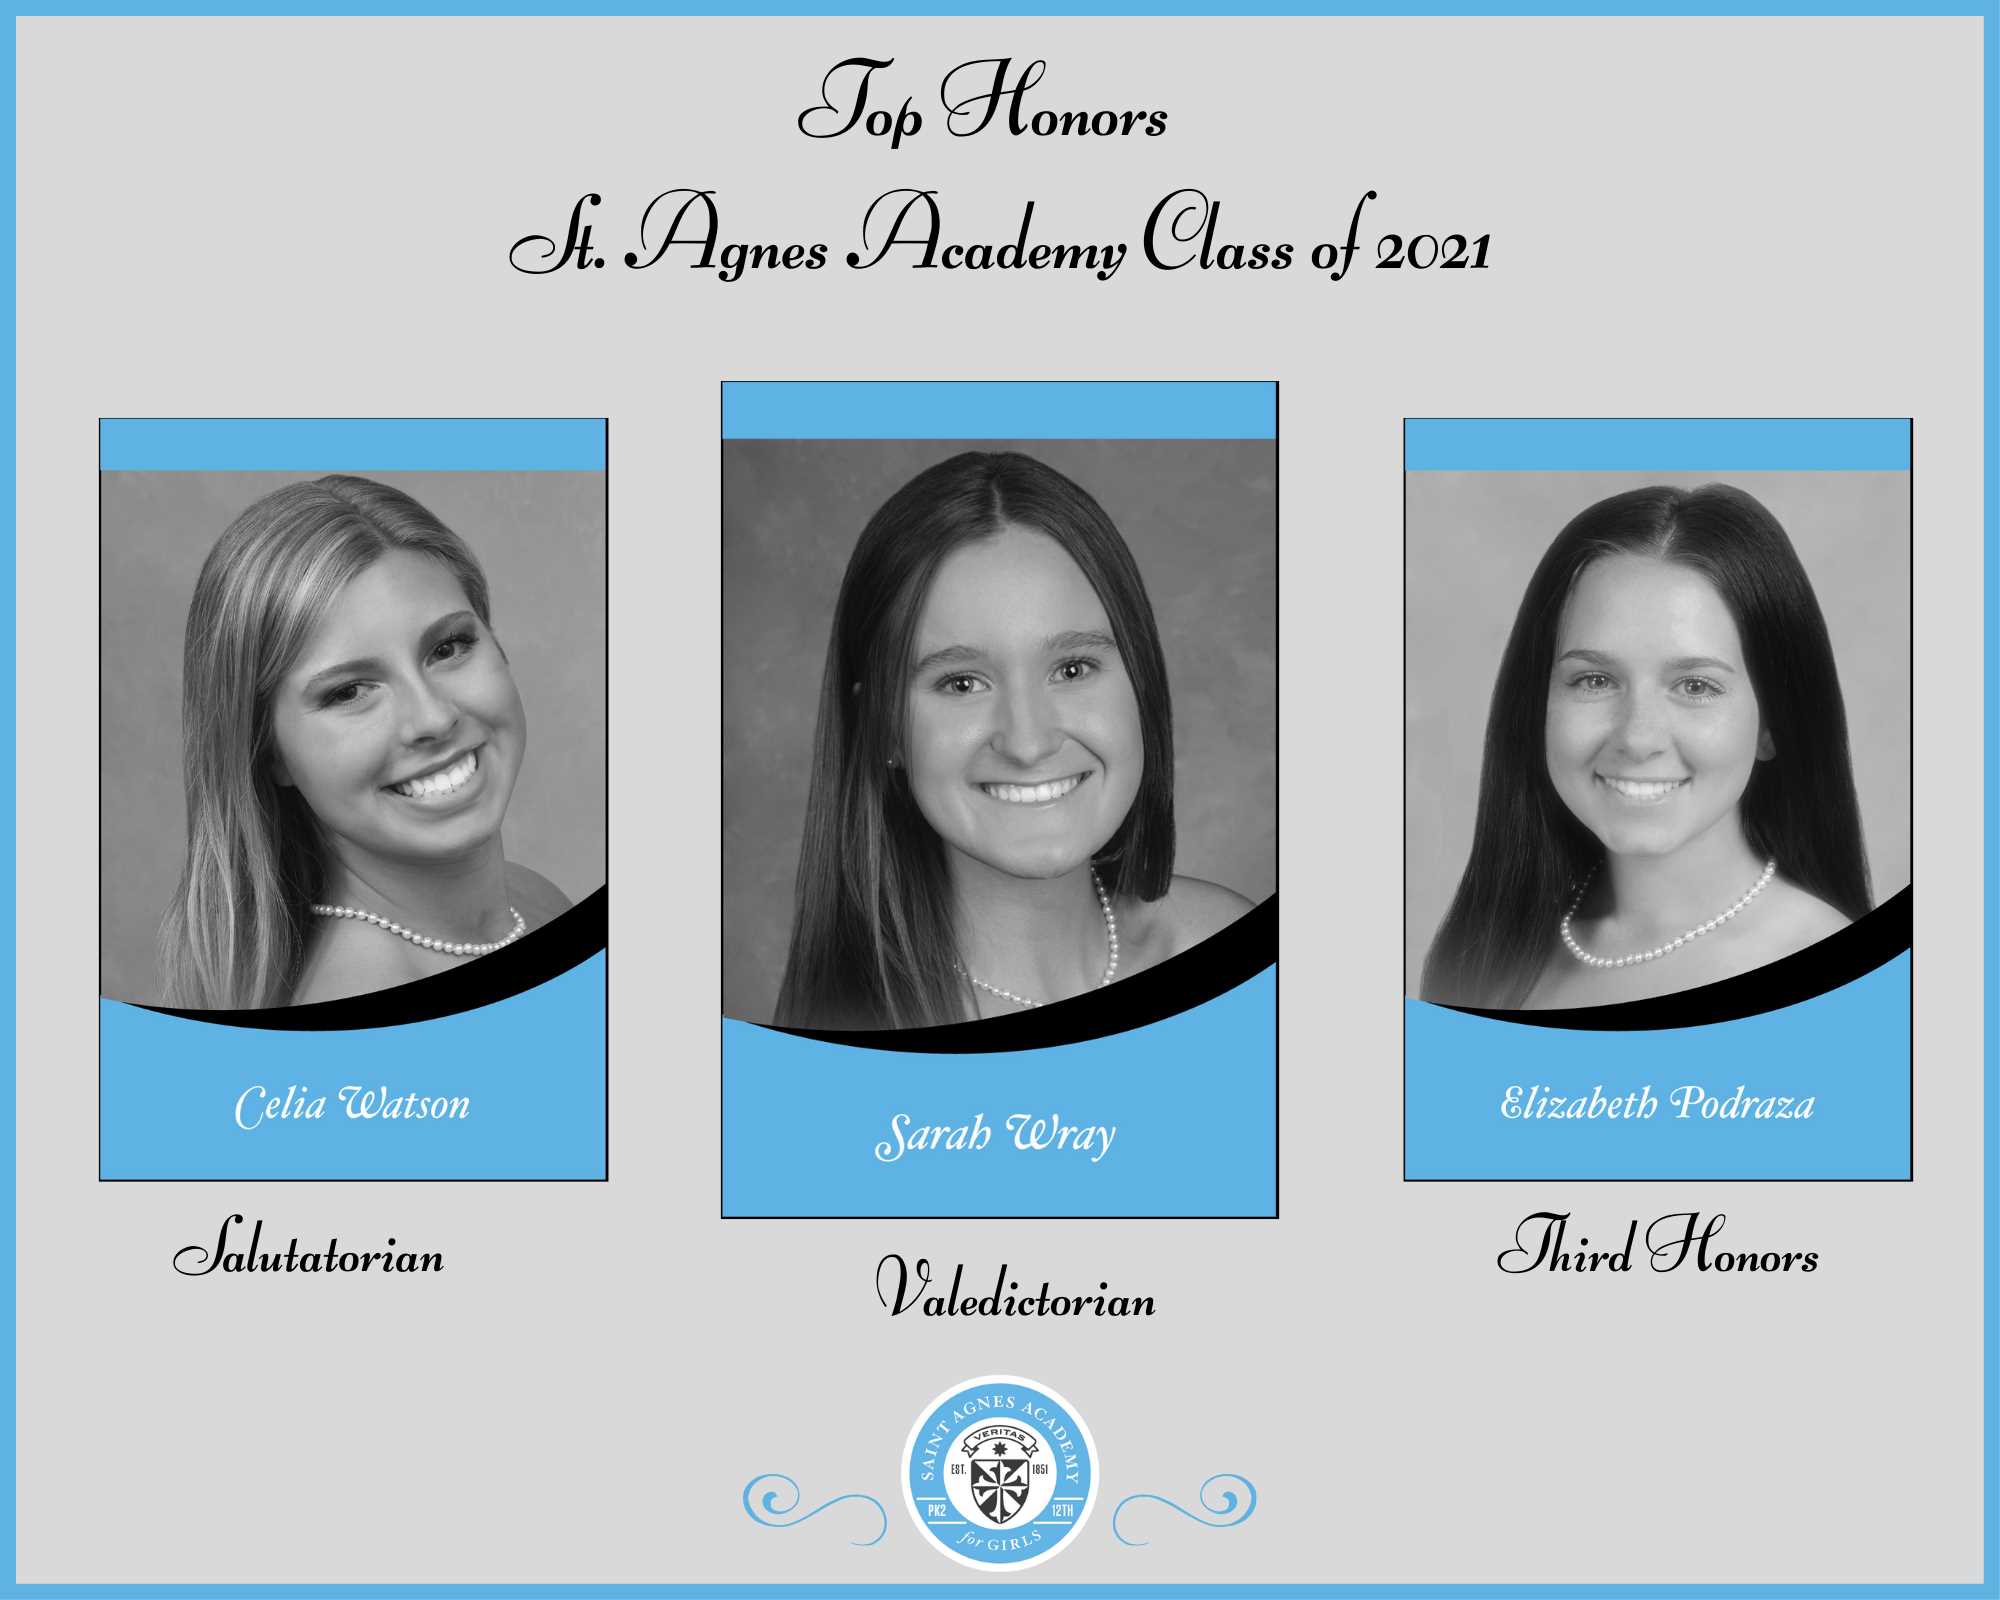 St. Agnes Academy Announces Top Honors for the Class of 2021